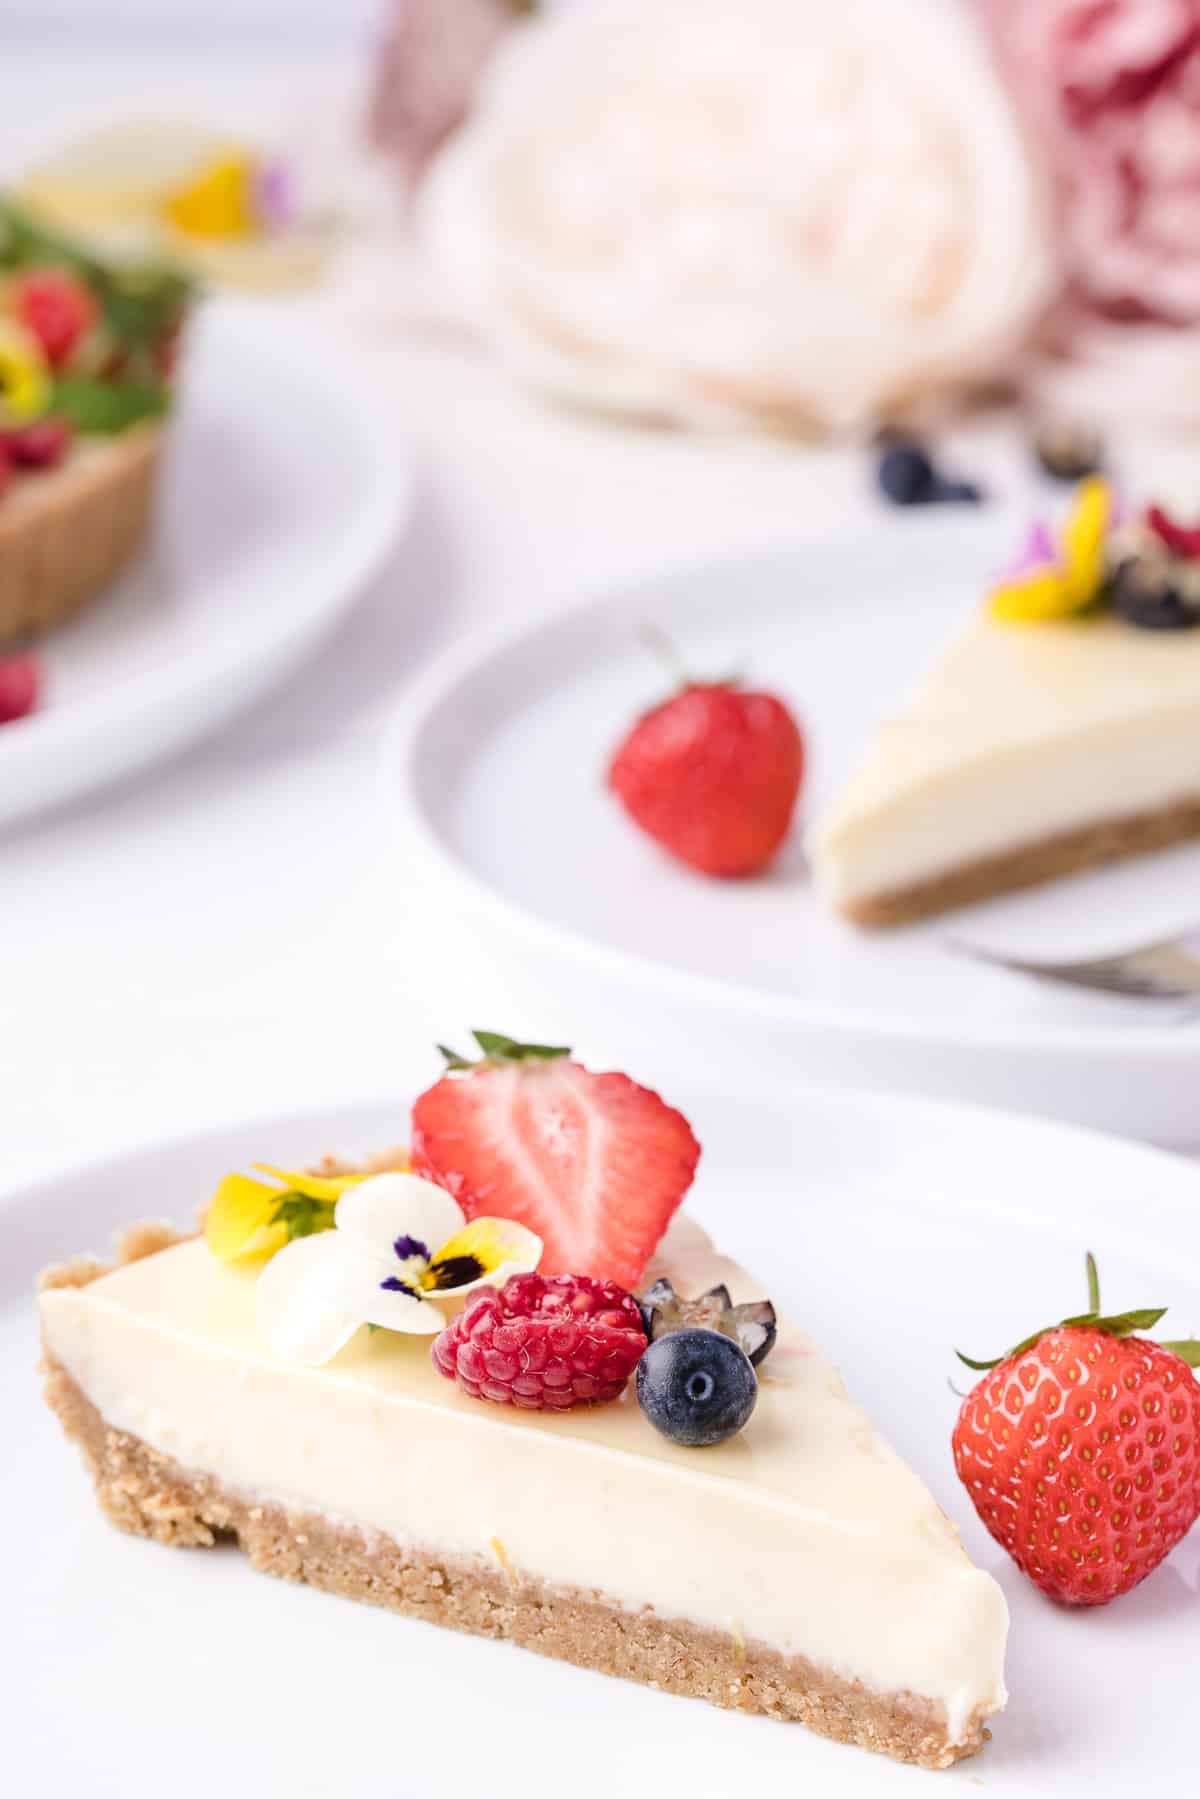 A slice of lemon icebox pie adorned with fresh berries and edible flowers, with more desserts in the background.